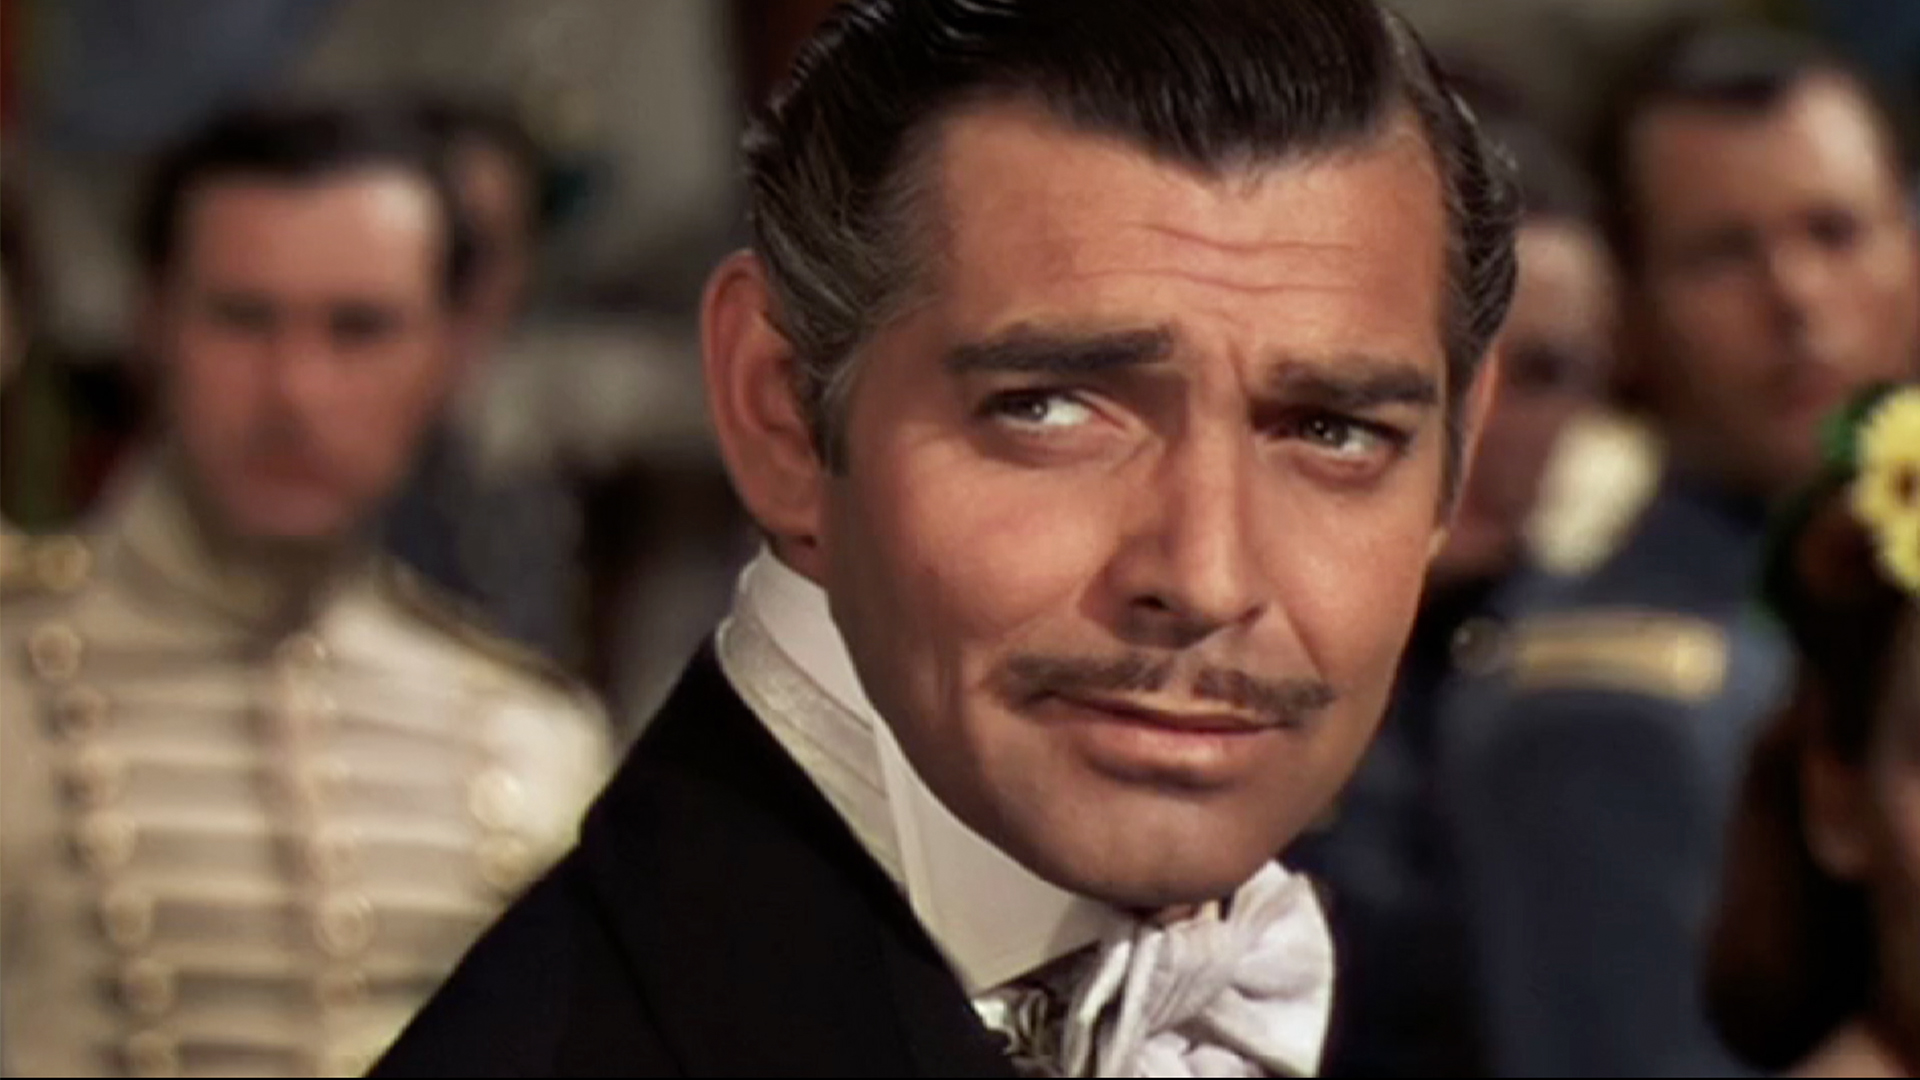 Clark Gable Biography: Movies, Age, Net Worth, Parents, Instagram, Height, Siblings, Children